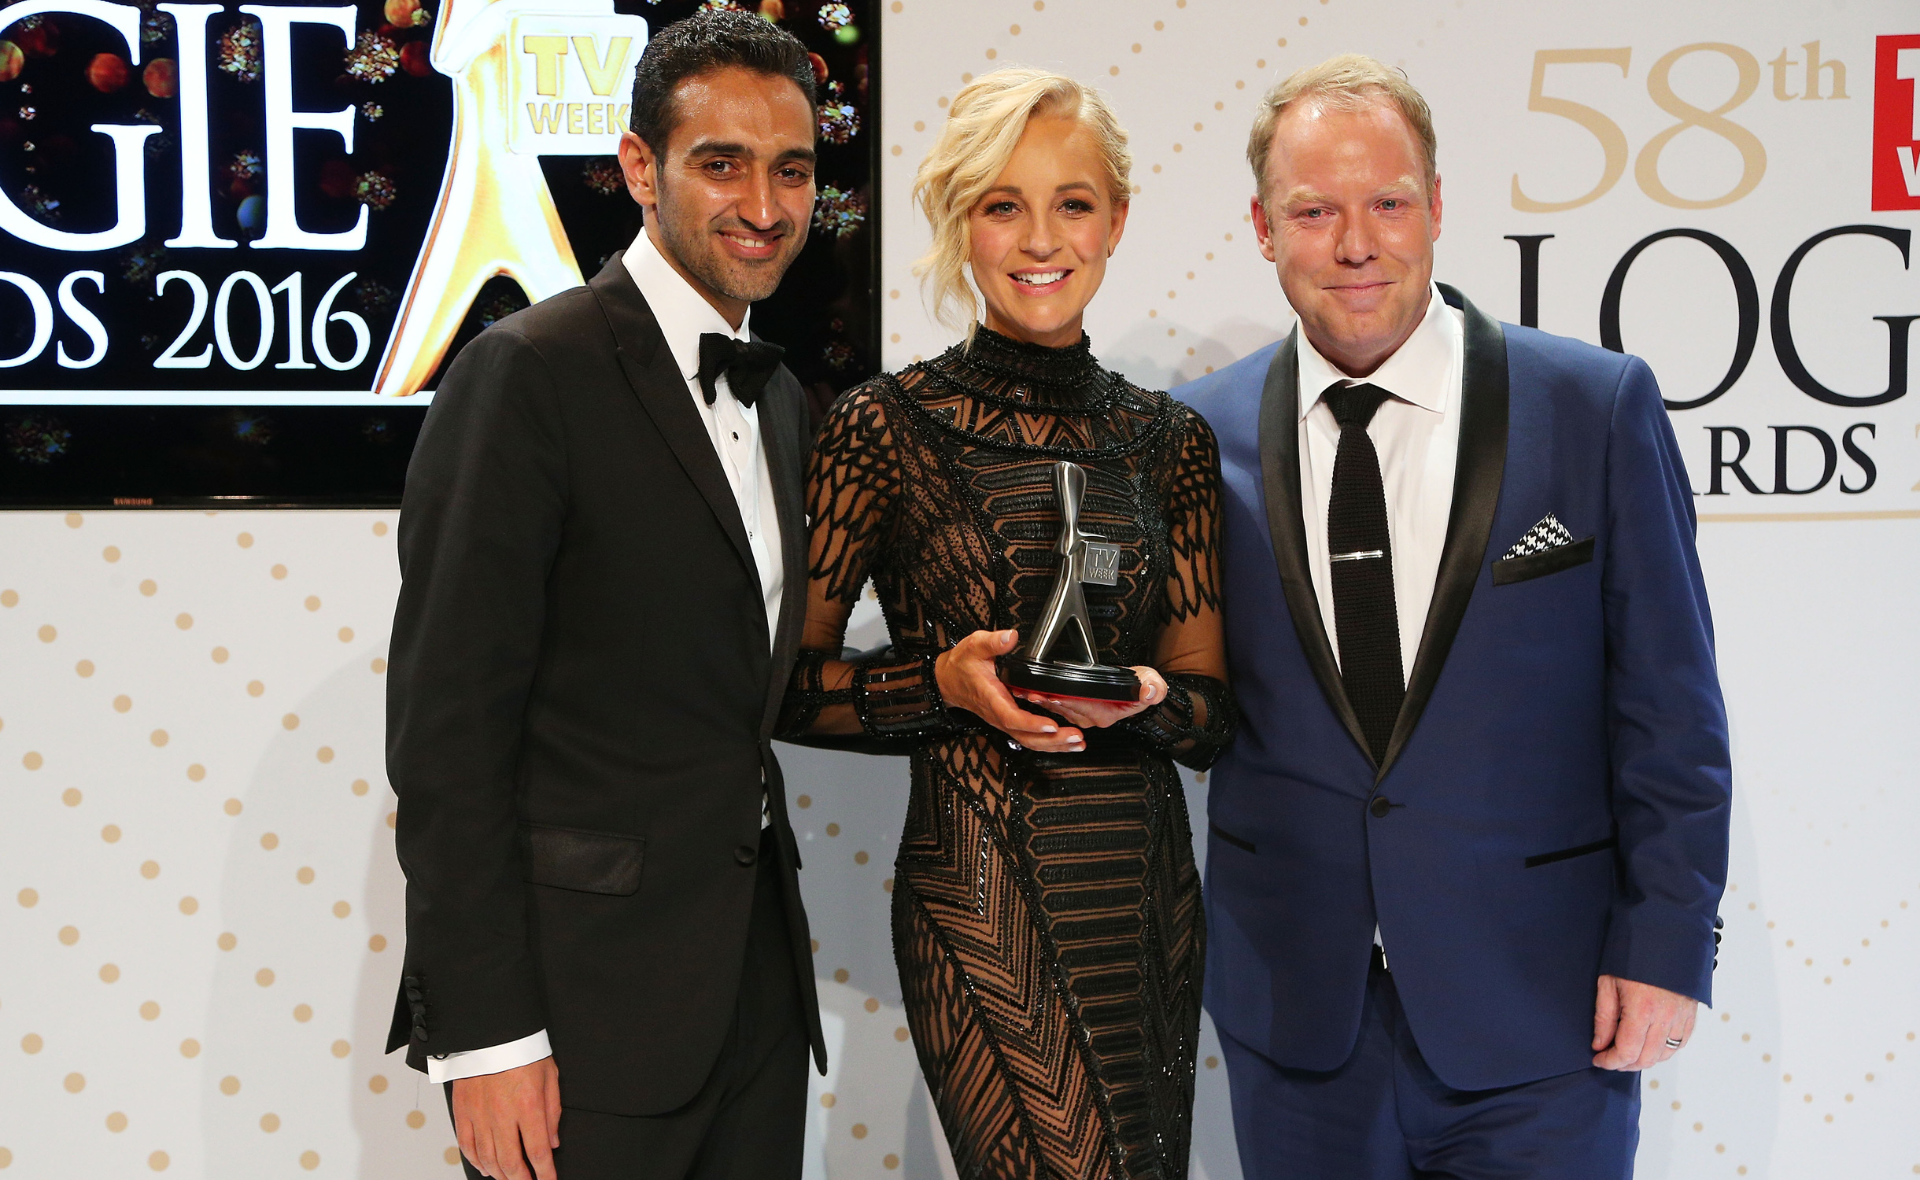 Waleed Aly opens up on his relationship with former co-stars on The Project